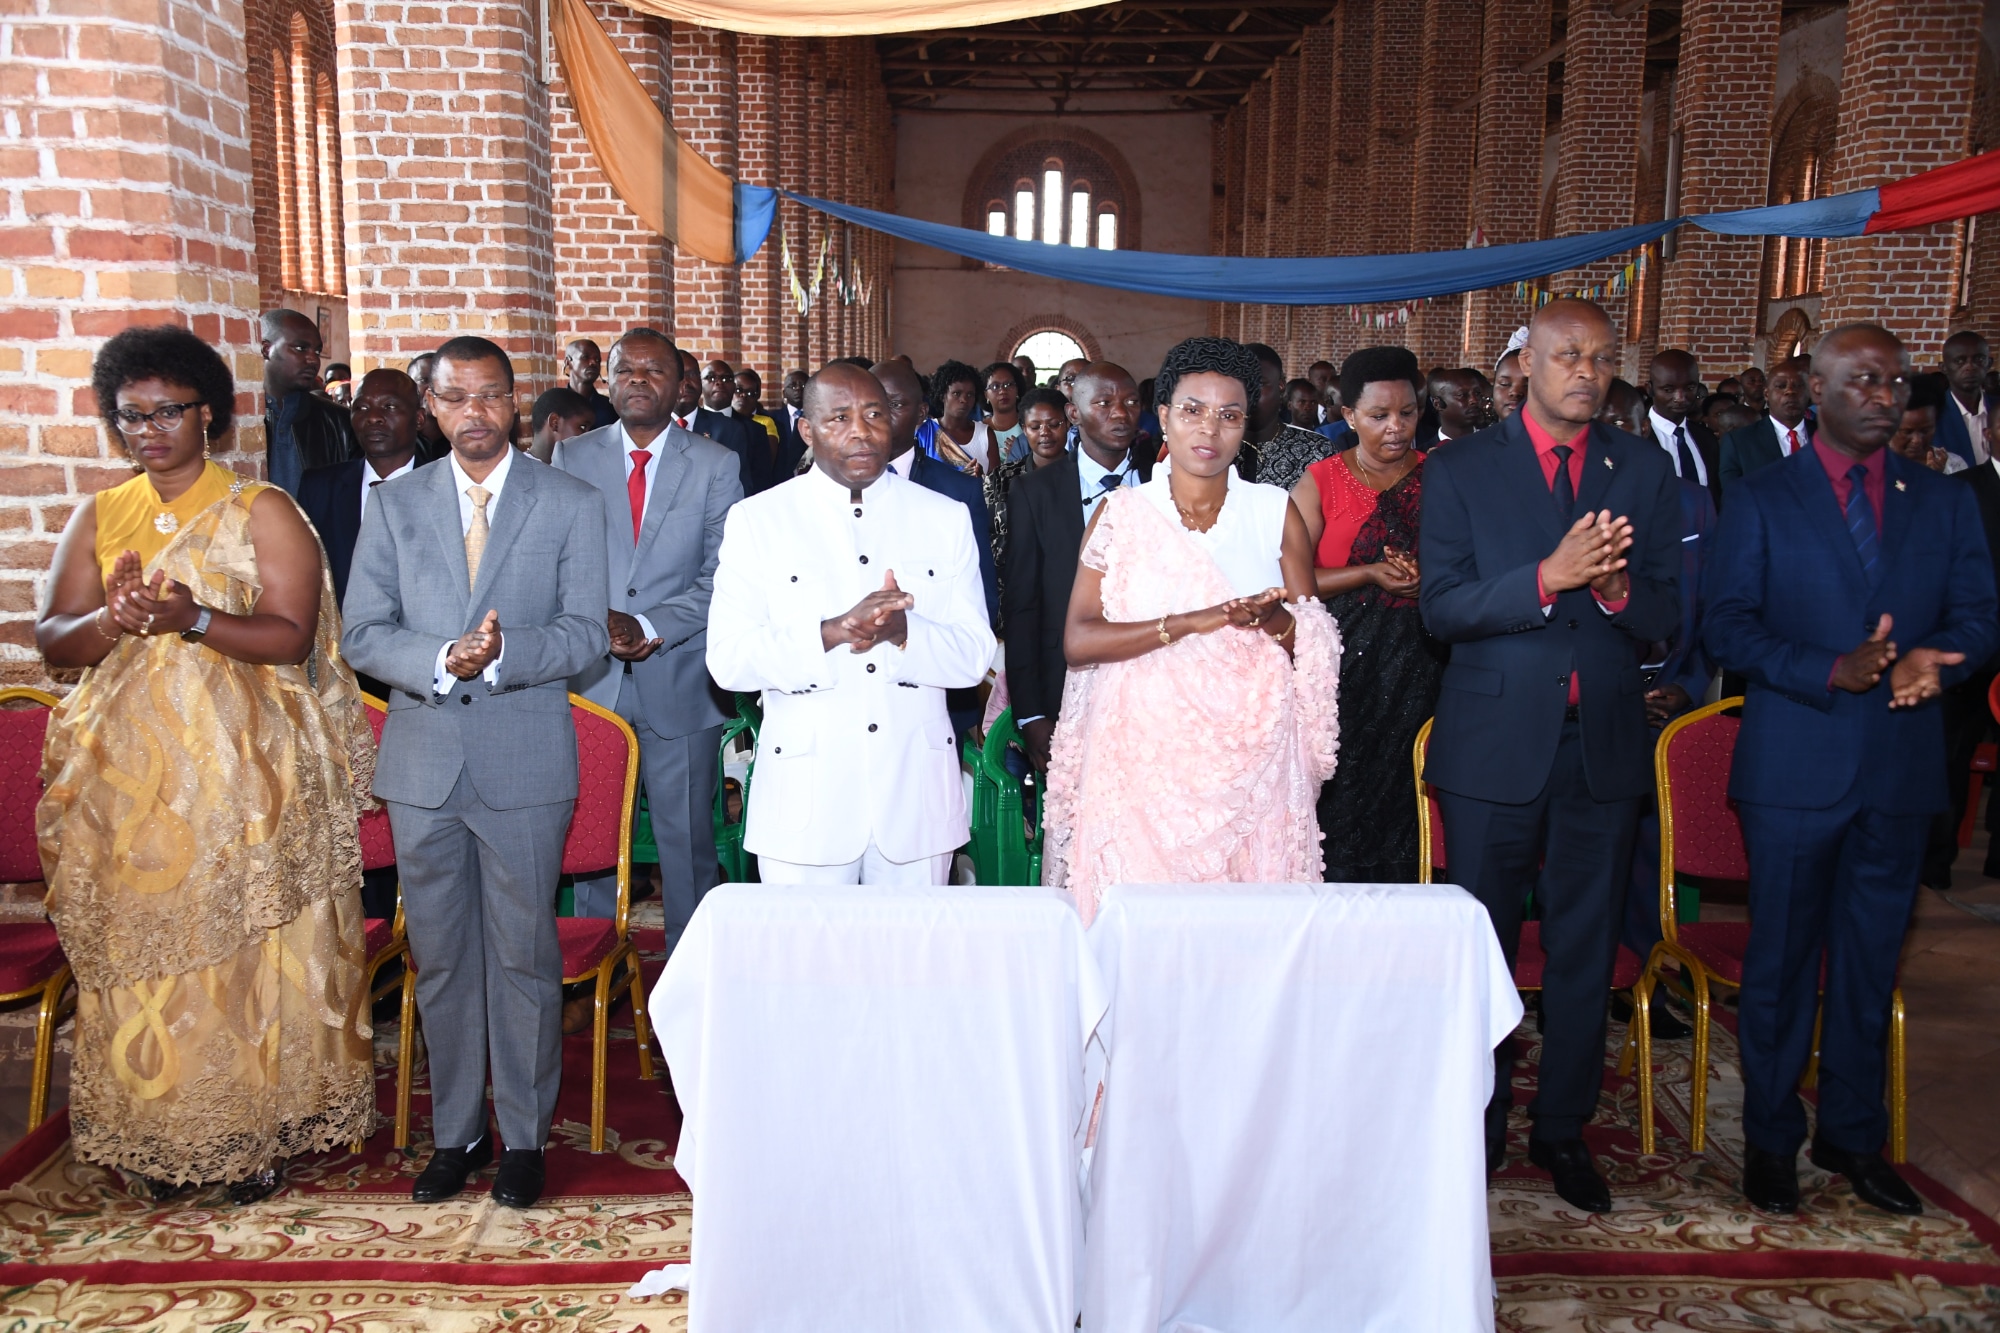 The Head of State implores the Lord protection over Burundi